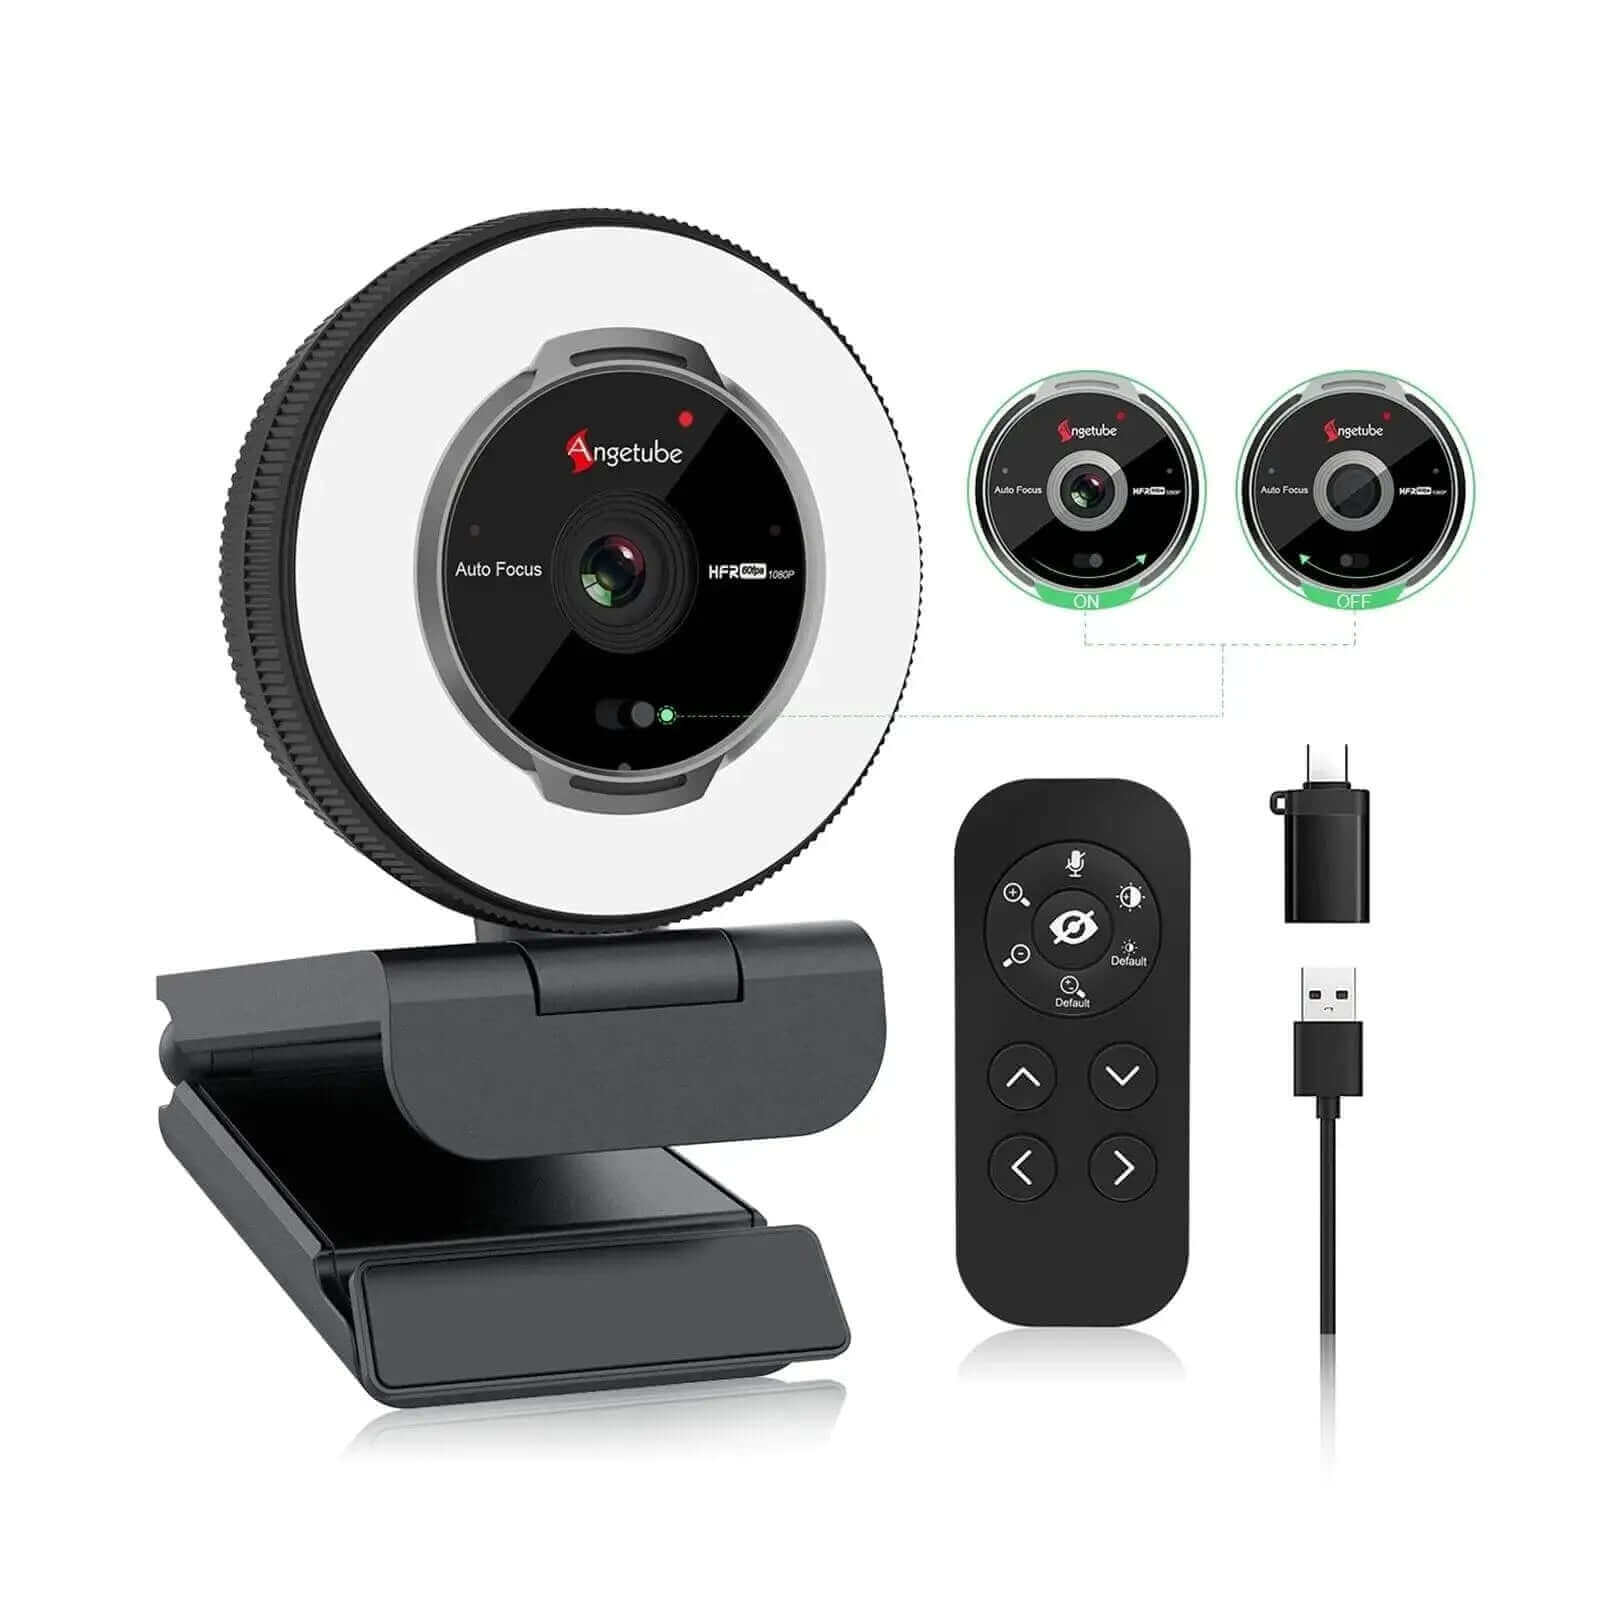 Angetube 1080p Webcam with Remote control 862Pro - Angetube